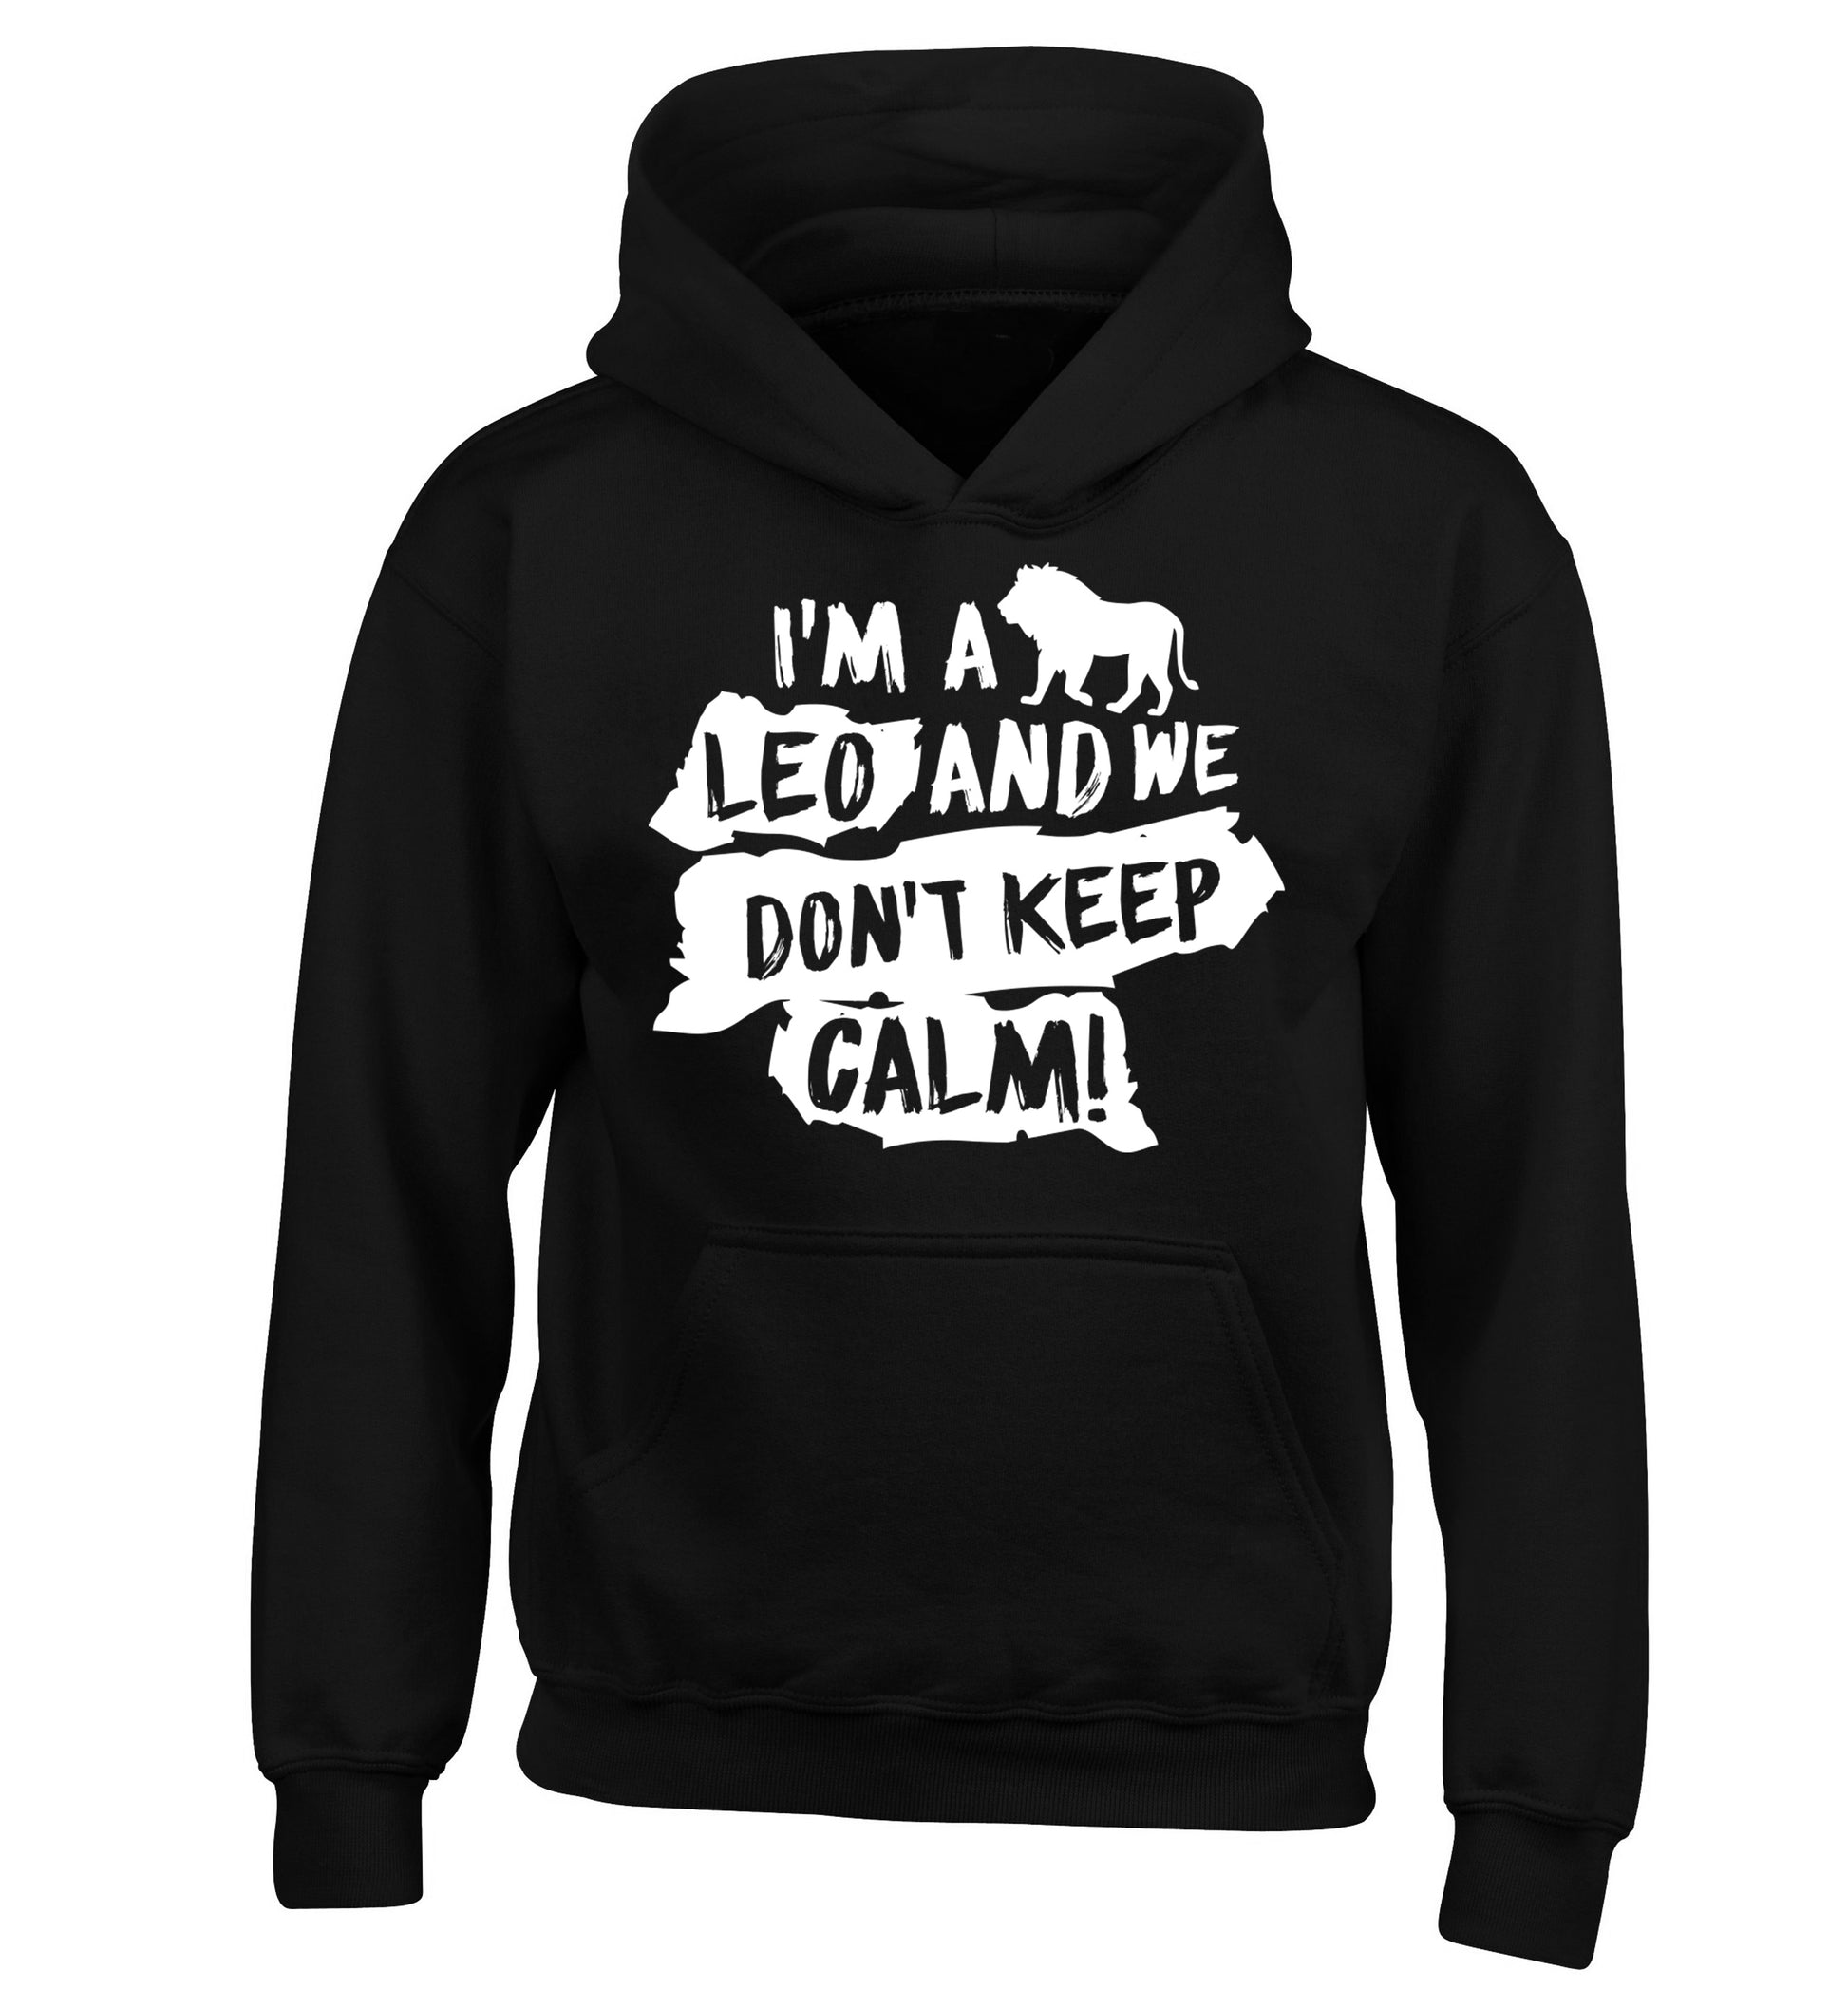 I'm a leo and we don't keep calm! children's black hoodie 12-13 Years